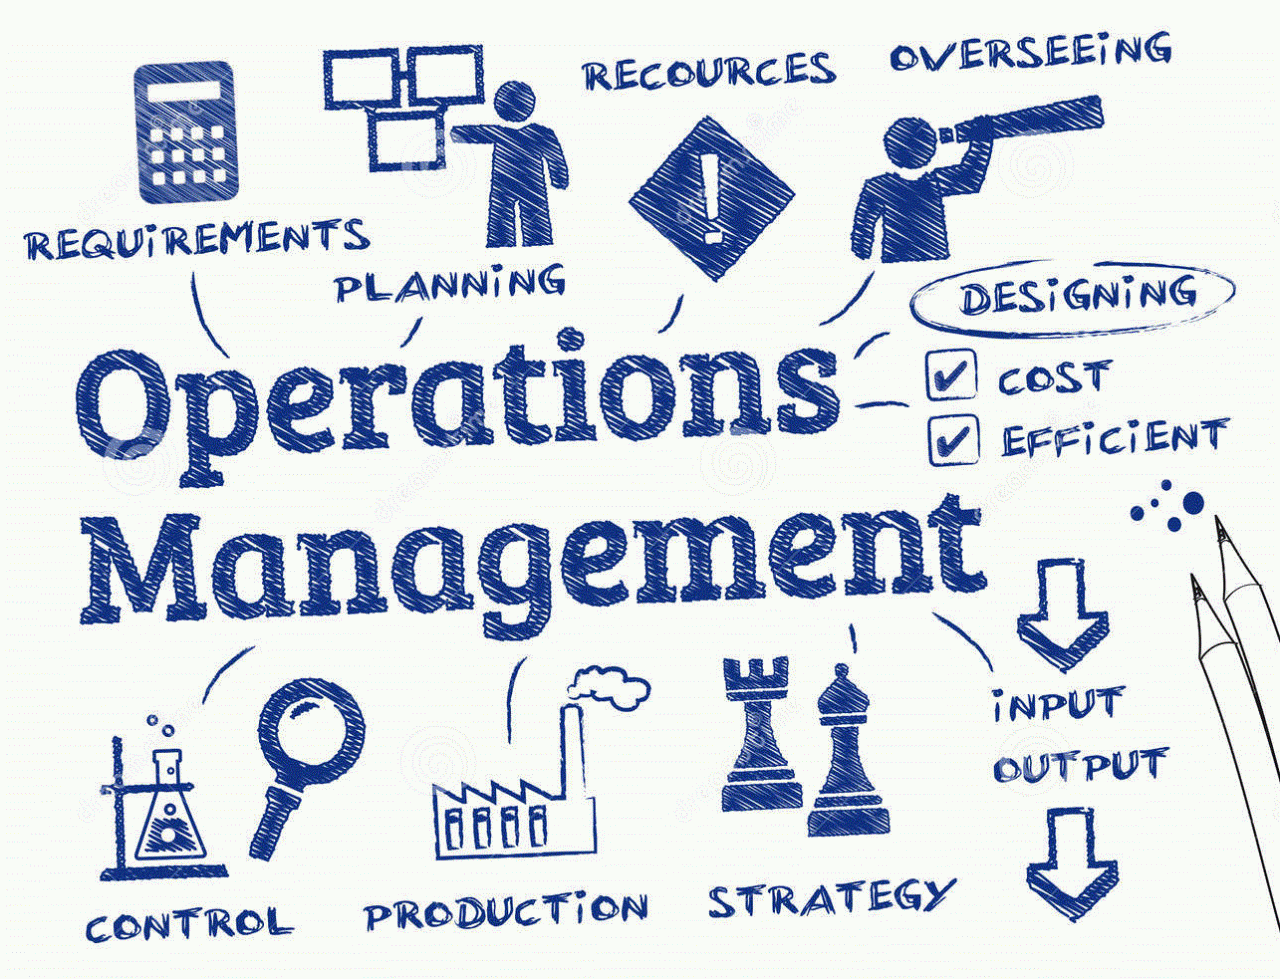 Functions of an operations manager